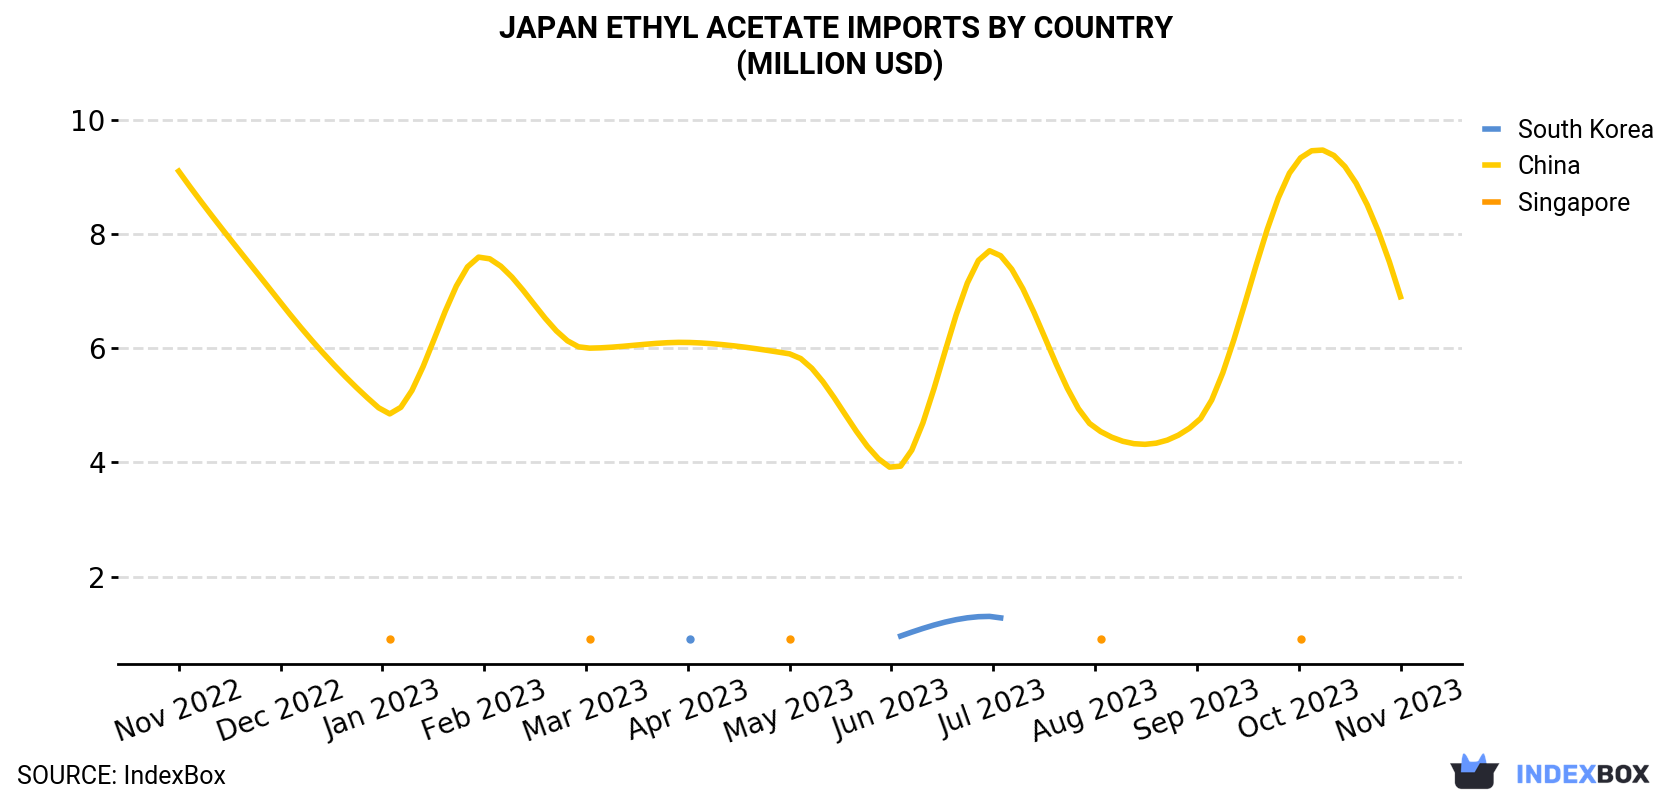 Japan Ethyl Acetate Imports By Country (Million USD)